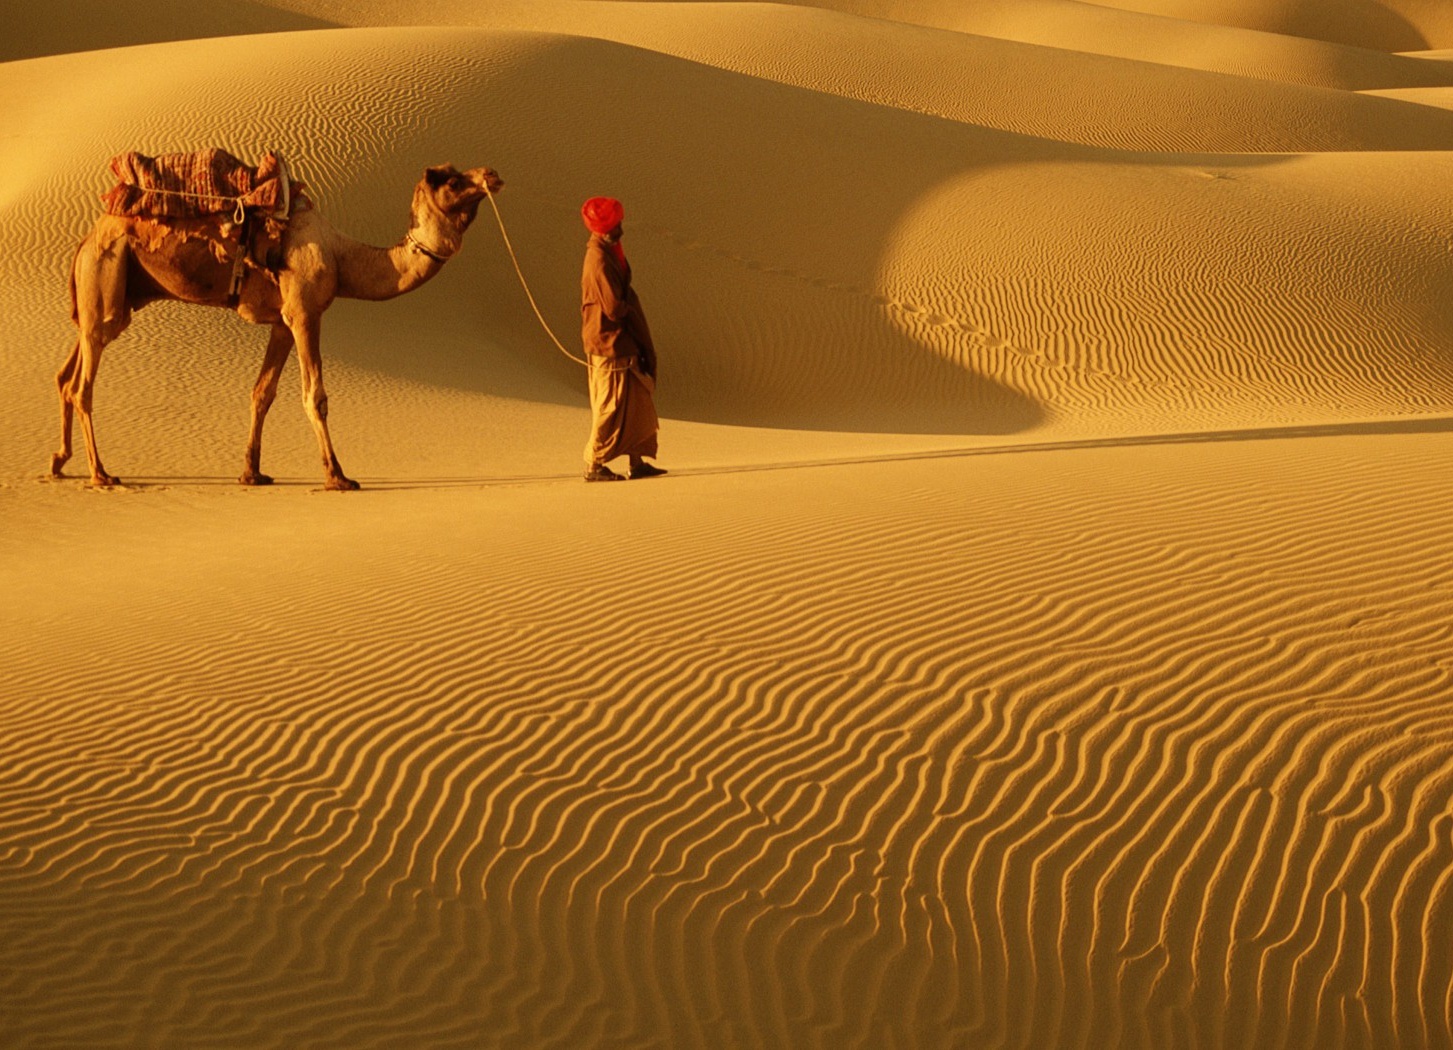 Top 5 Attractions To Enjoy In Rajasthan